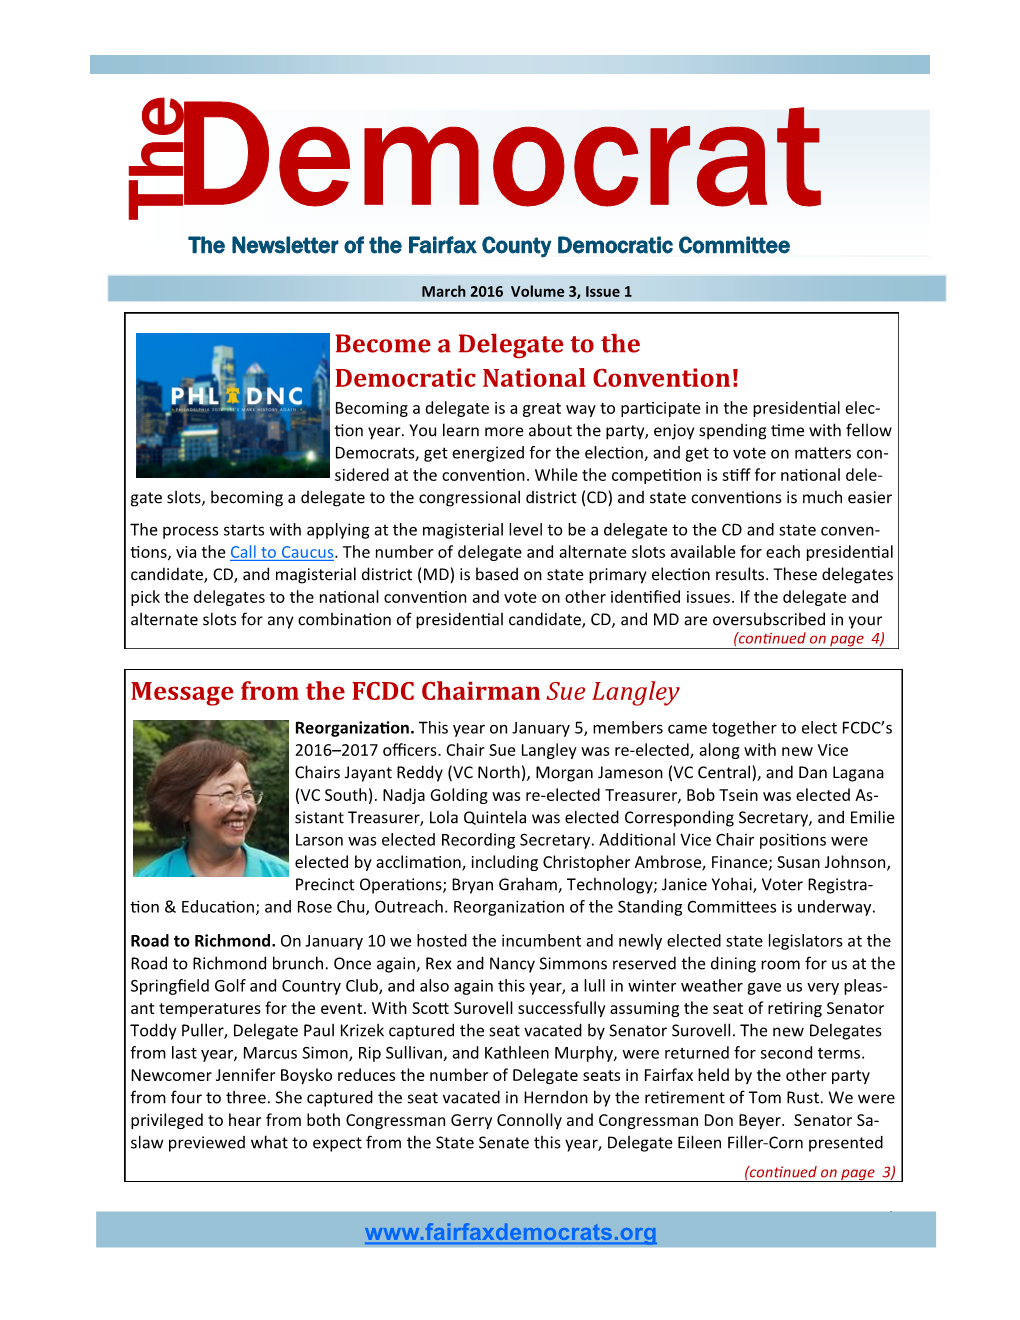 Message from the FCDC Chairman Sue Langley Become a Delegate To